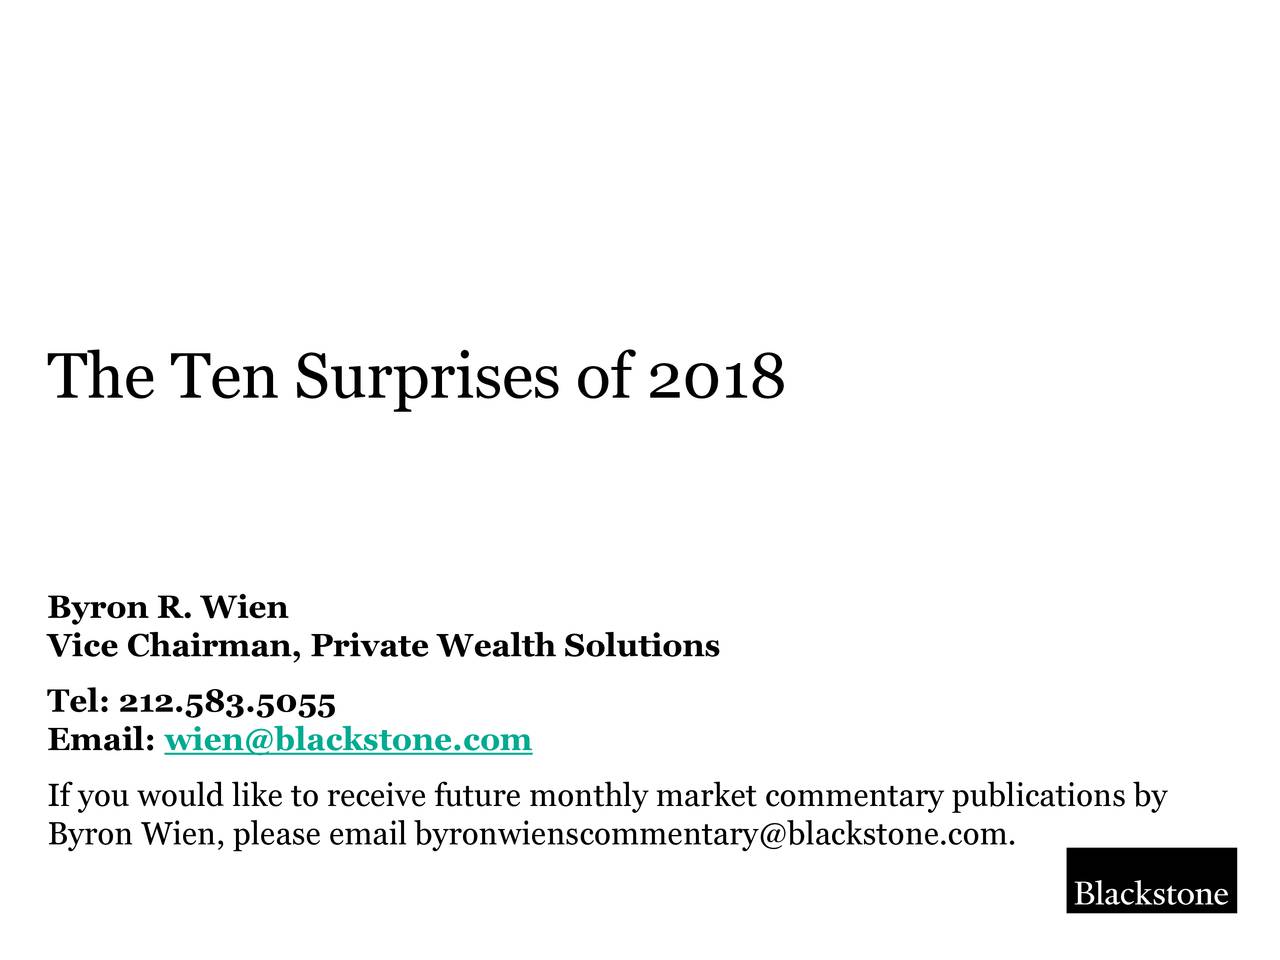 Byron R. Wien Vice Chairman, Private Wealth Solutions Tel: 212.583.5055 Email: wien@blackstone.com If you would like to receive future monthly market commentary publications by Byron Wien, please email byronwienscommentary@blackstone.com. 0